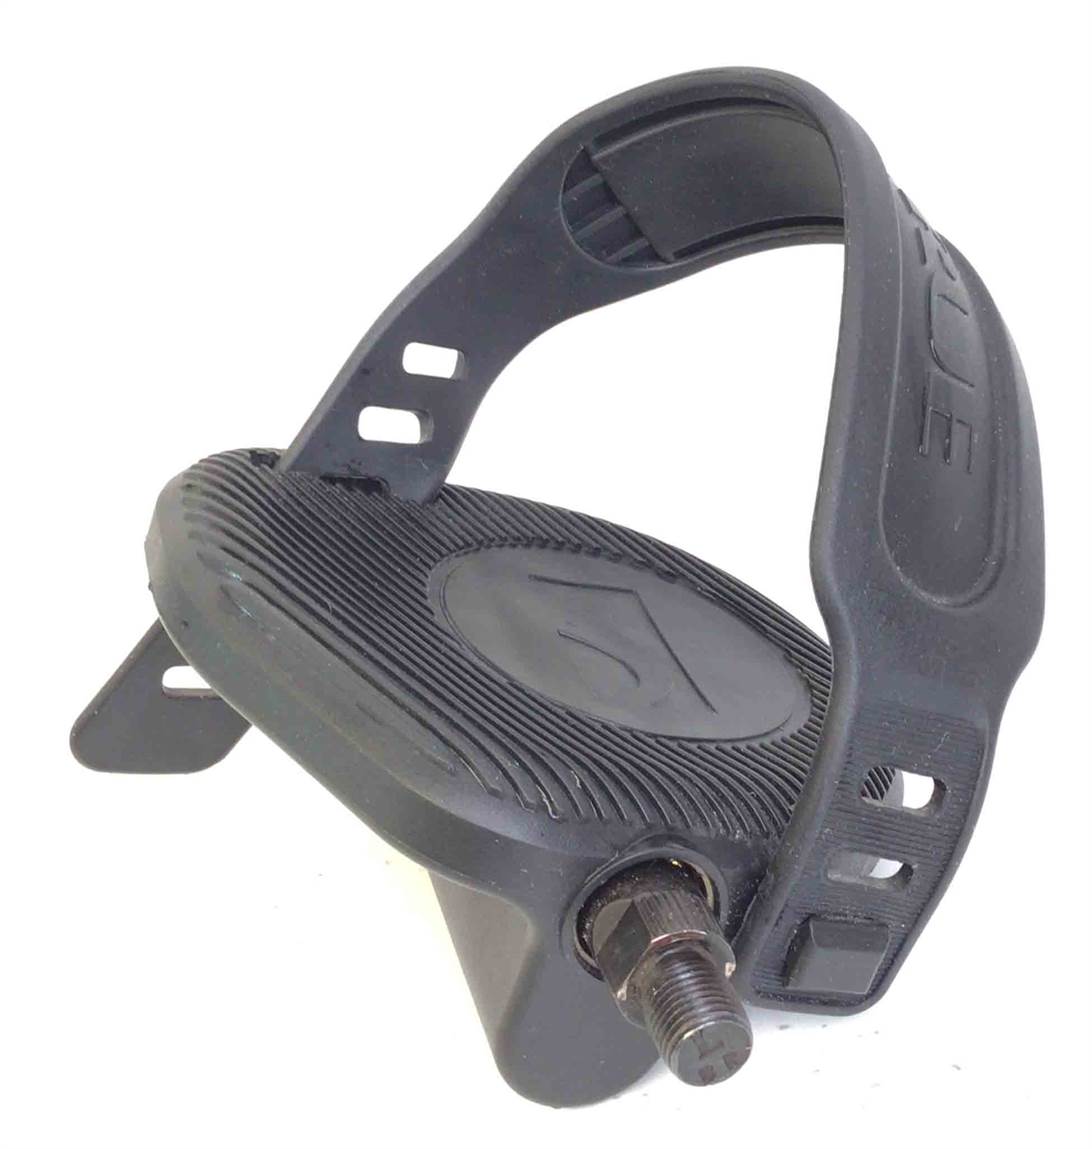 Left Foot Pedal With Strap (Used)